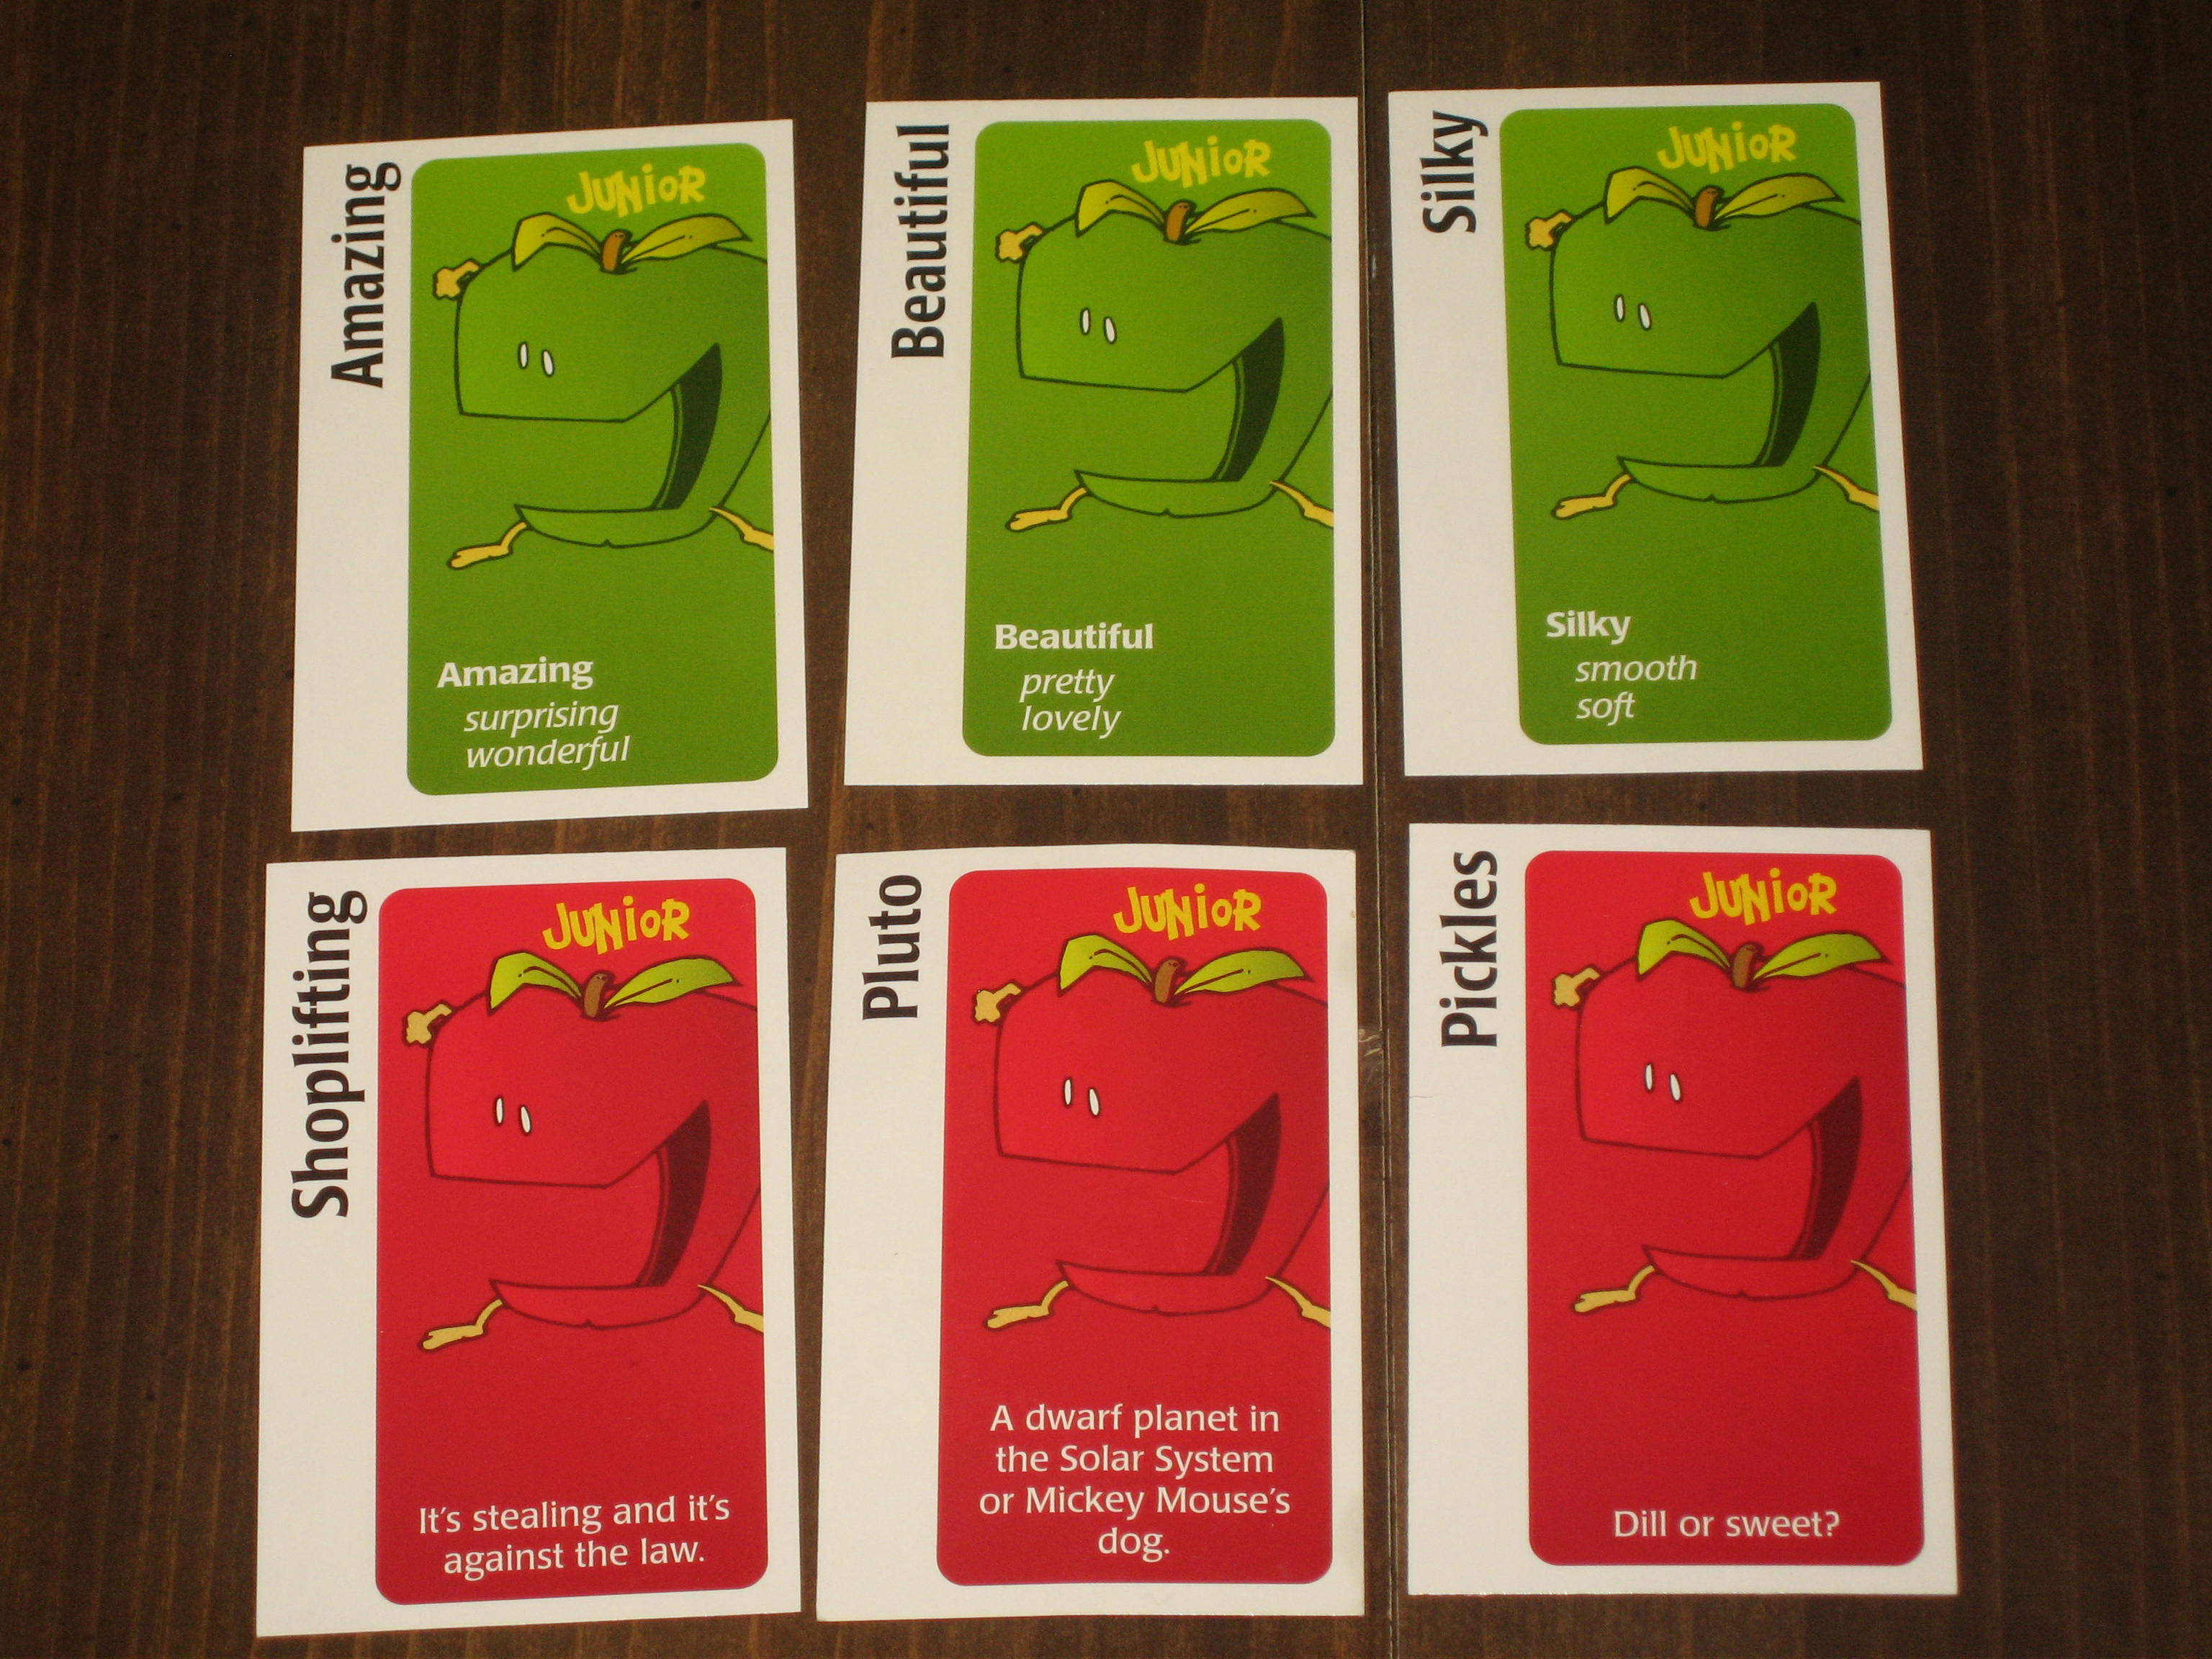 apples-to-apples-junior-edition-dad-s-gaming-addiction